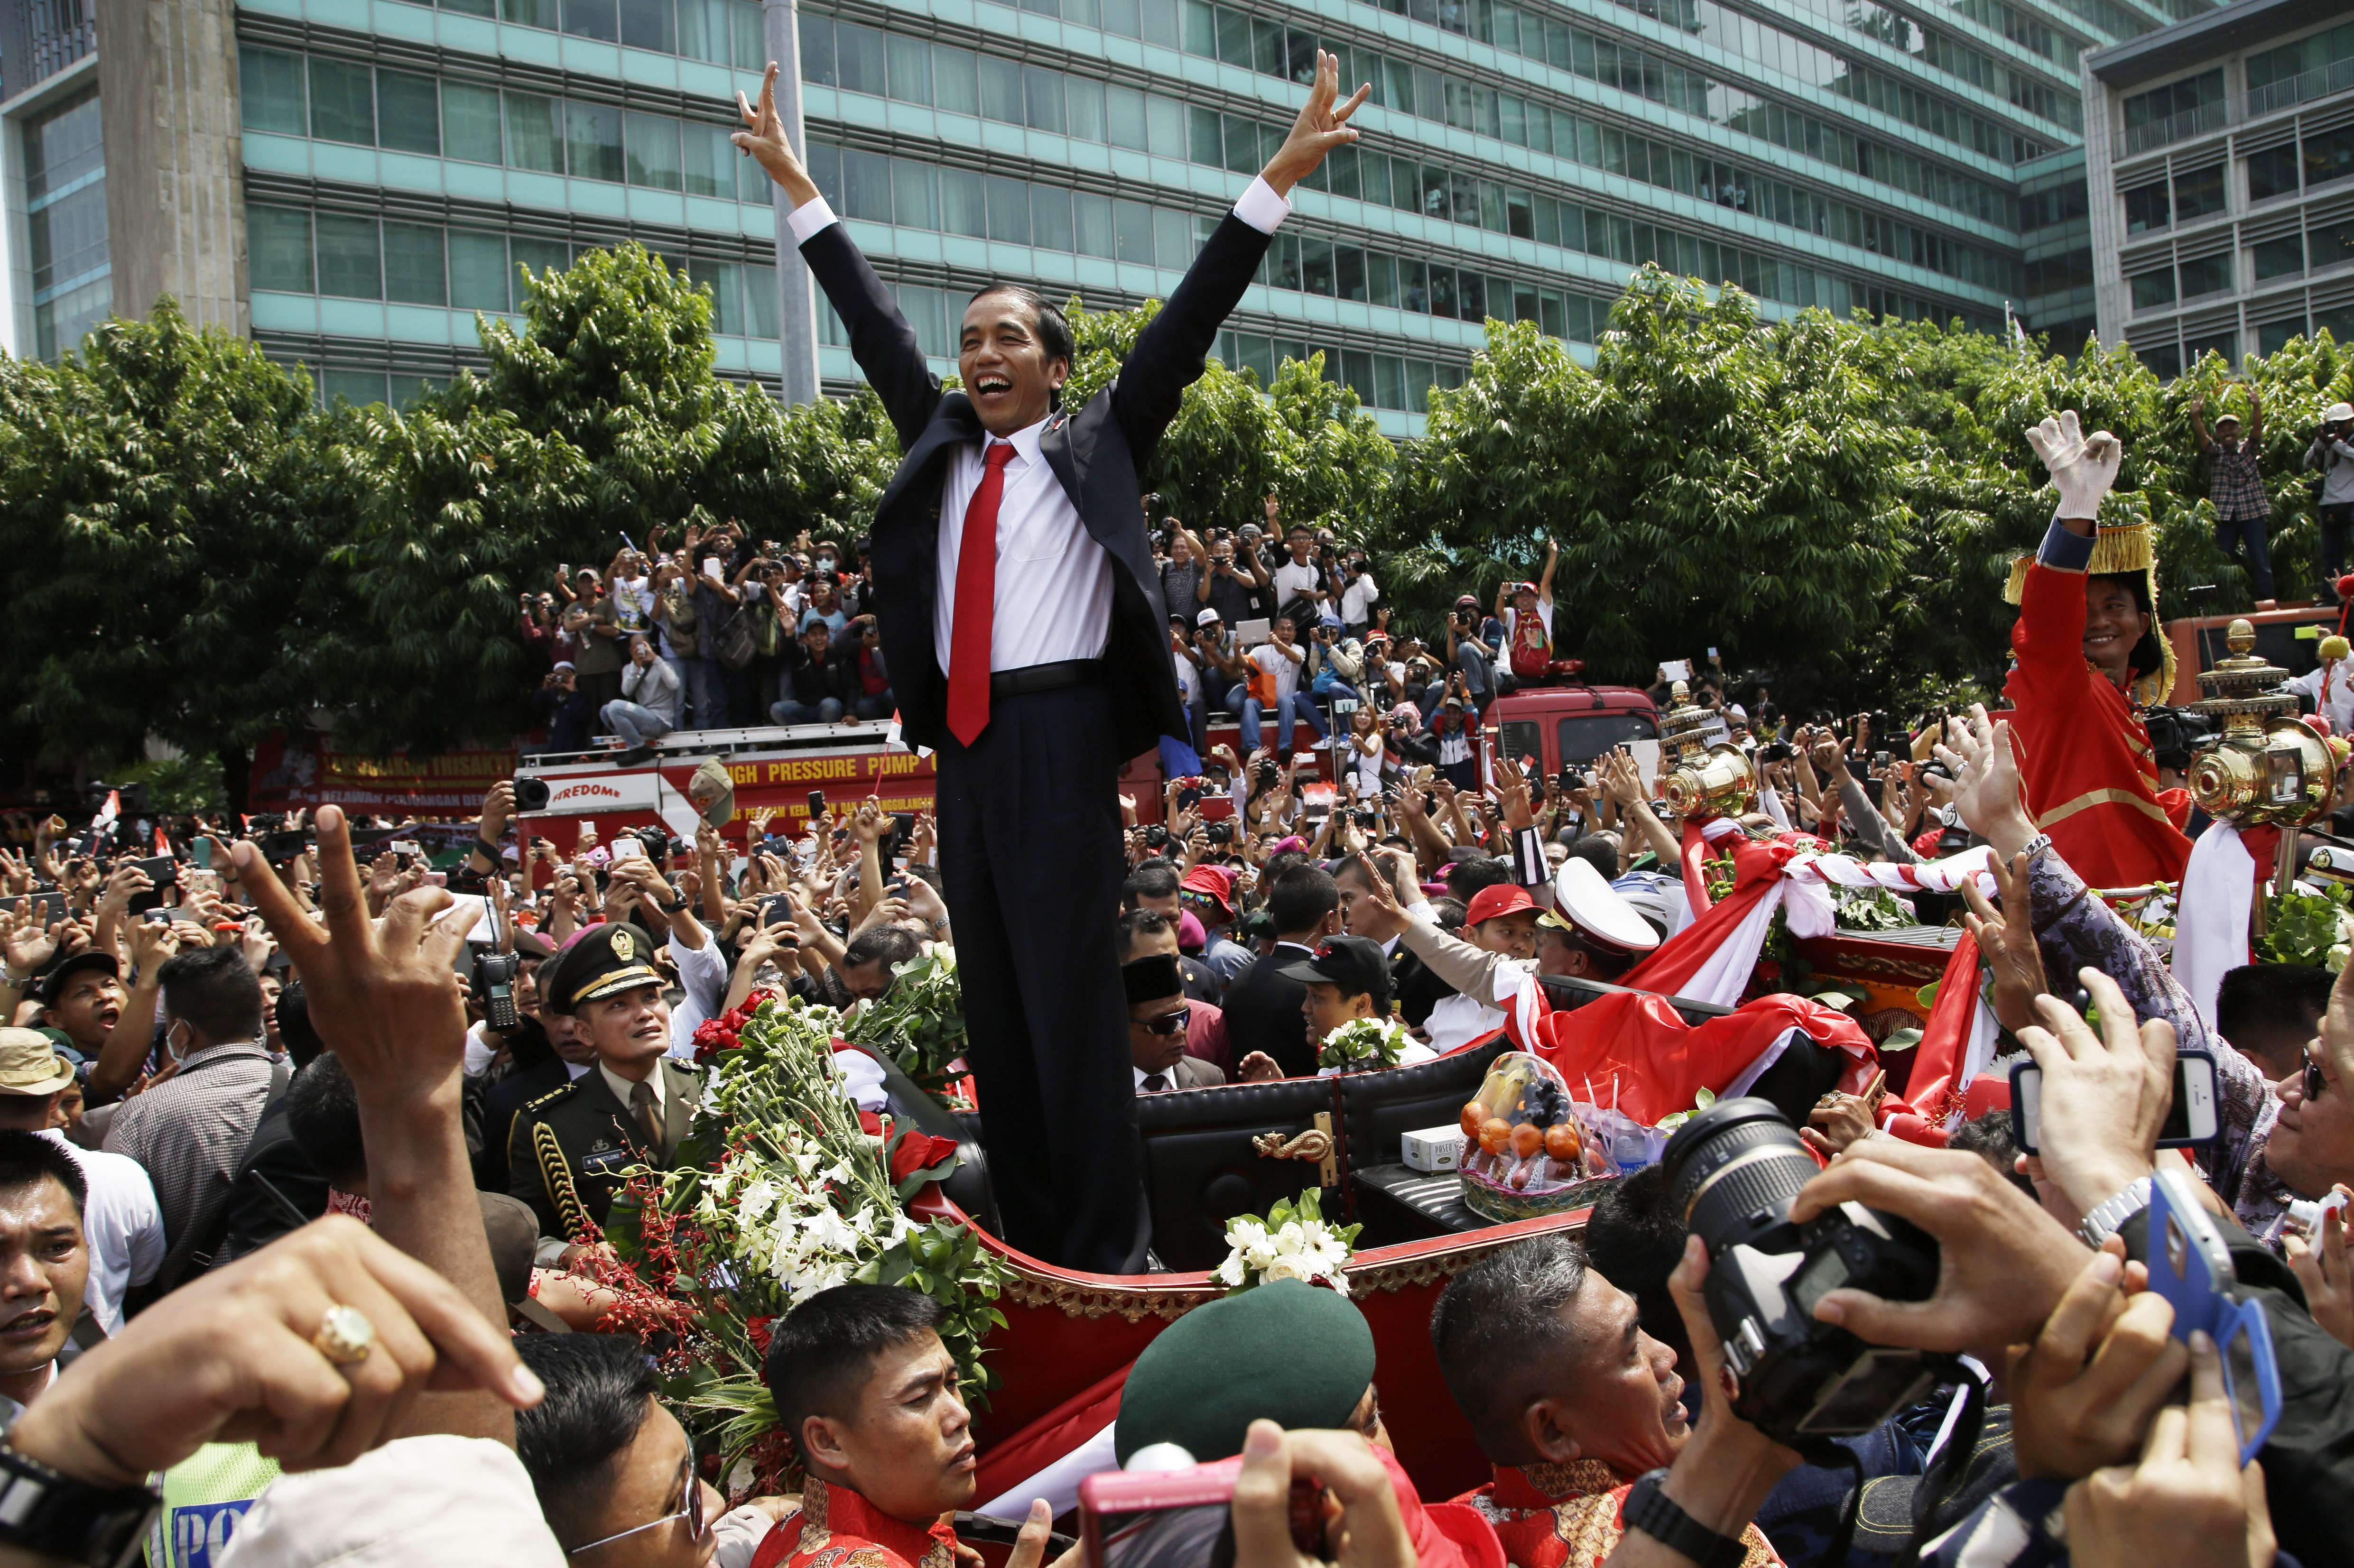 A jubilant President Joko Widodo gestures to the crowd during a street parade following his inauguration in Jakarta on October 20, 2014. After great success with his landmark tax amnesty plan and coalition-building, Widodo may be risking it all by siding with Islamic conservatives. Photo: AP